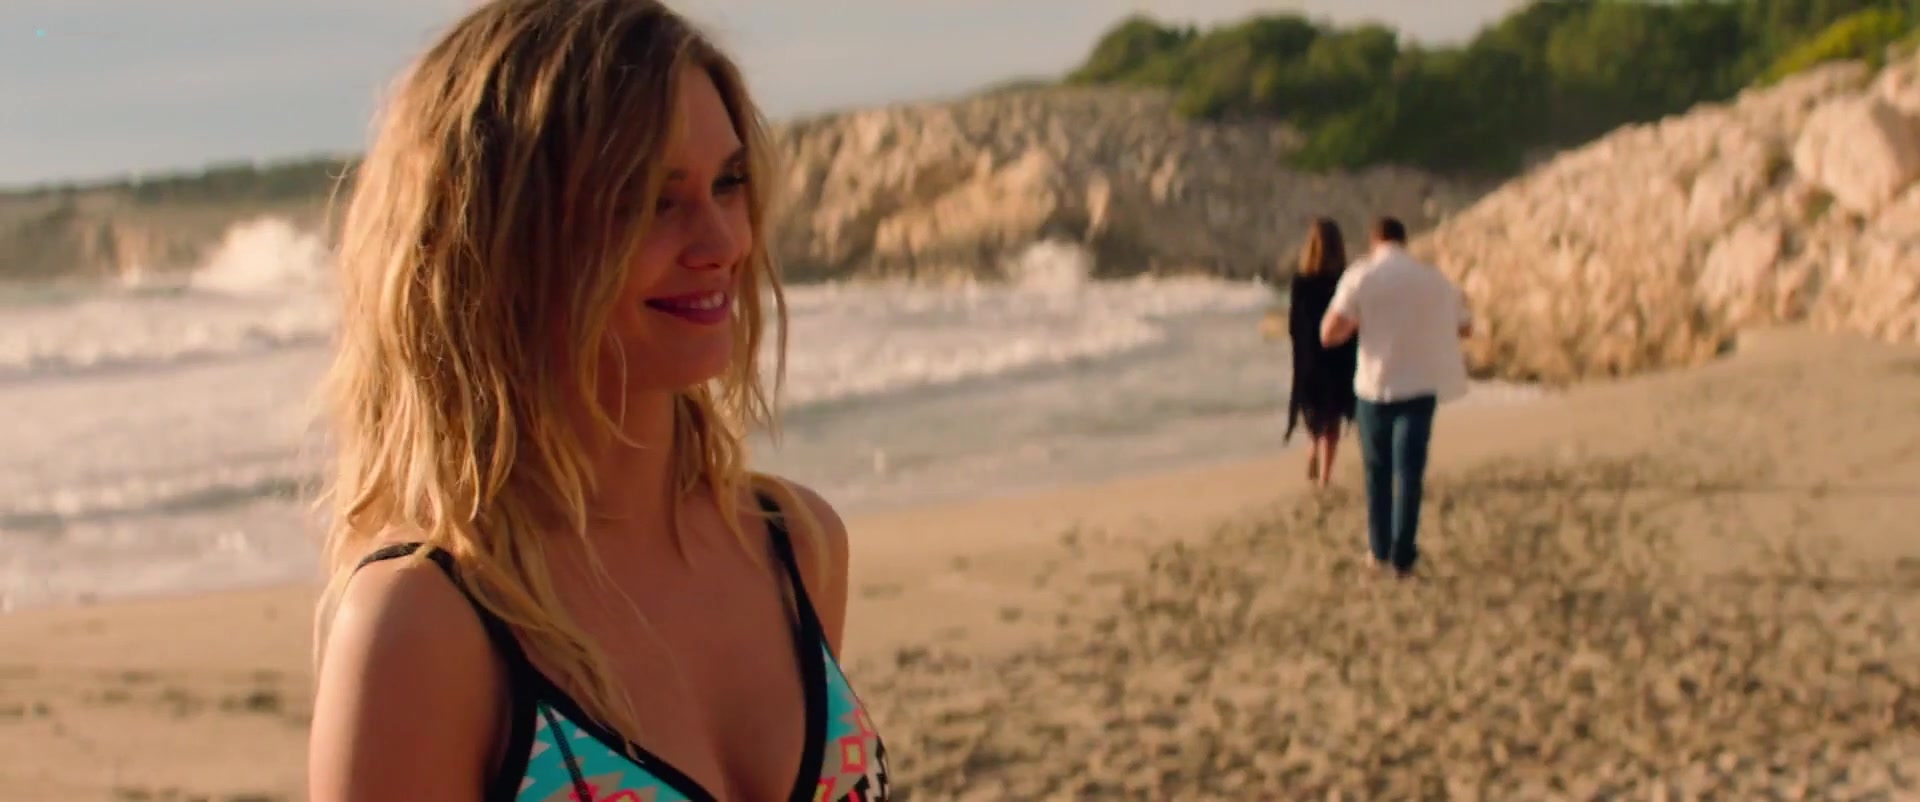 Gaia Weiss and Ana de Armas sexy walking in the beach for Overdrive